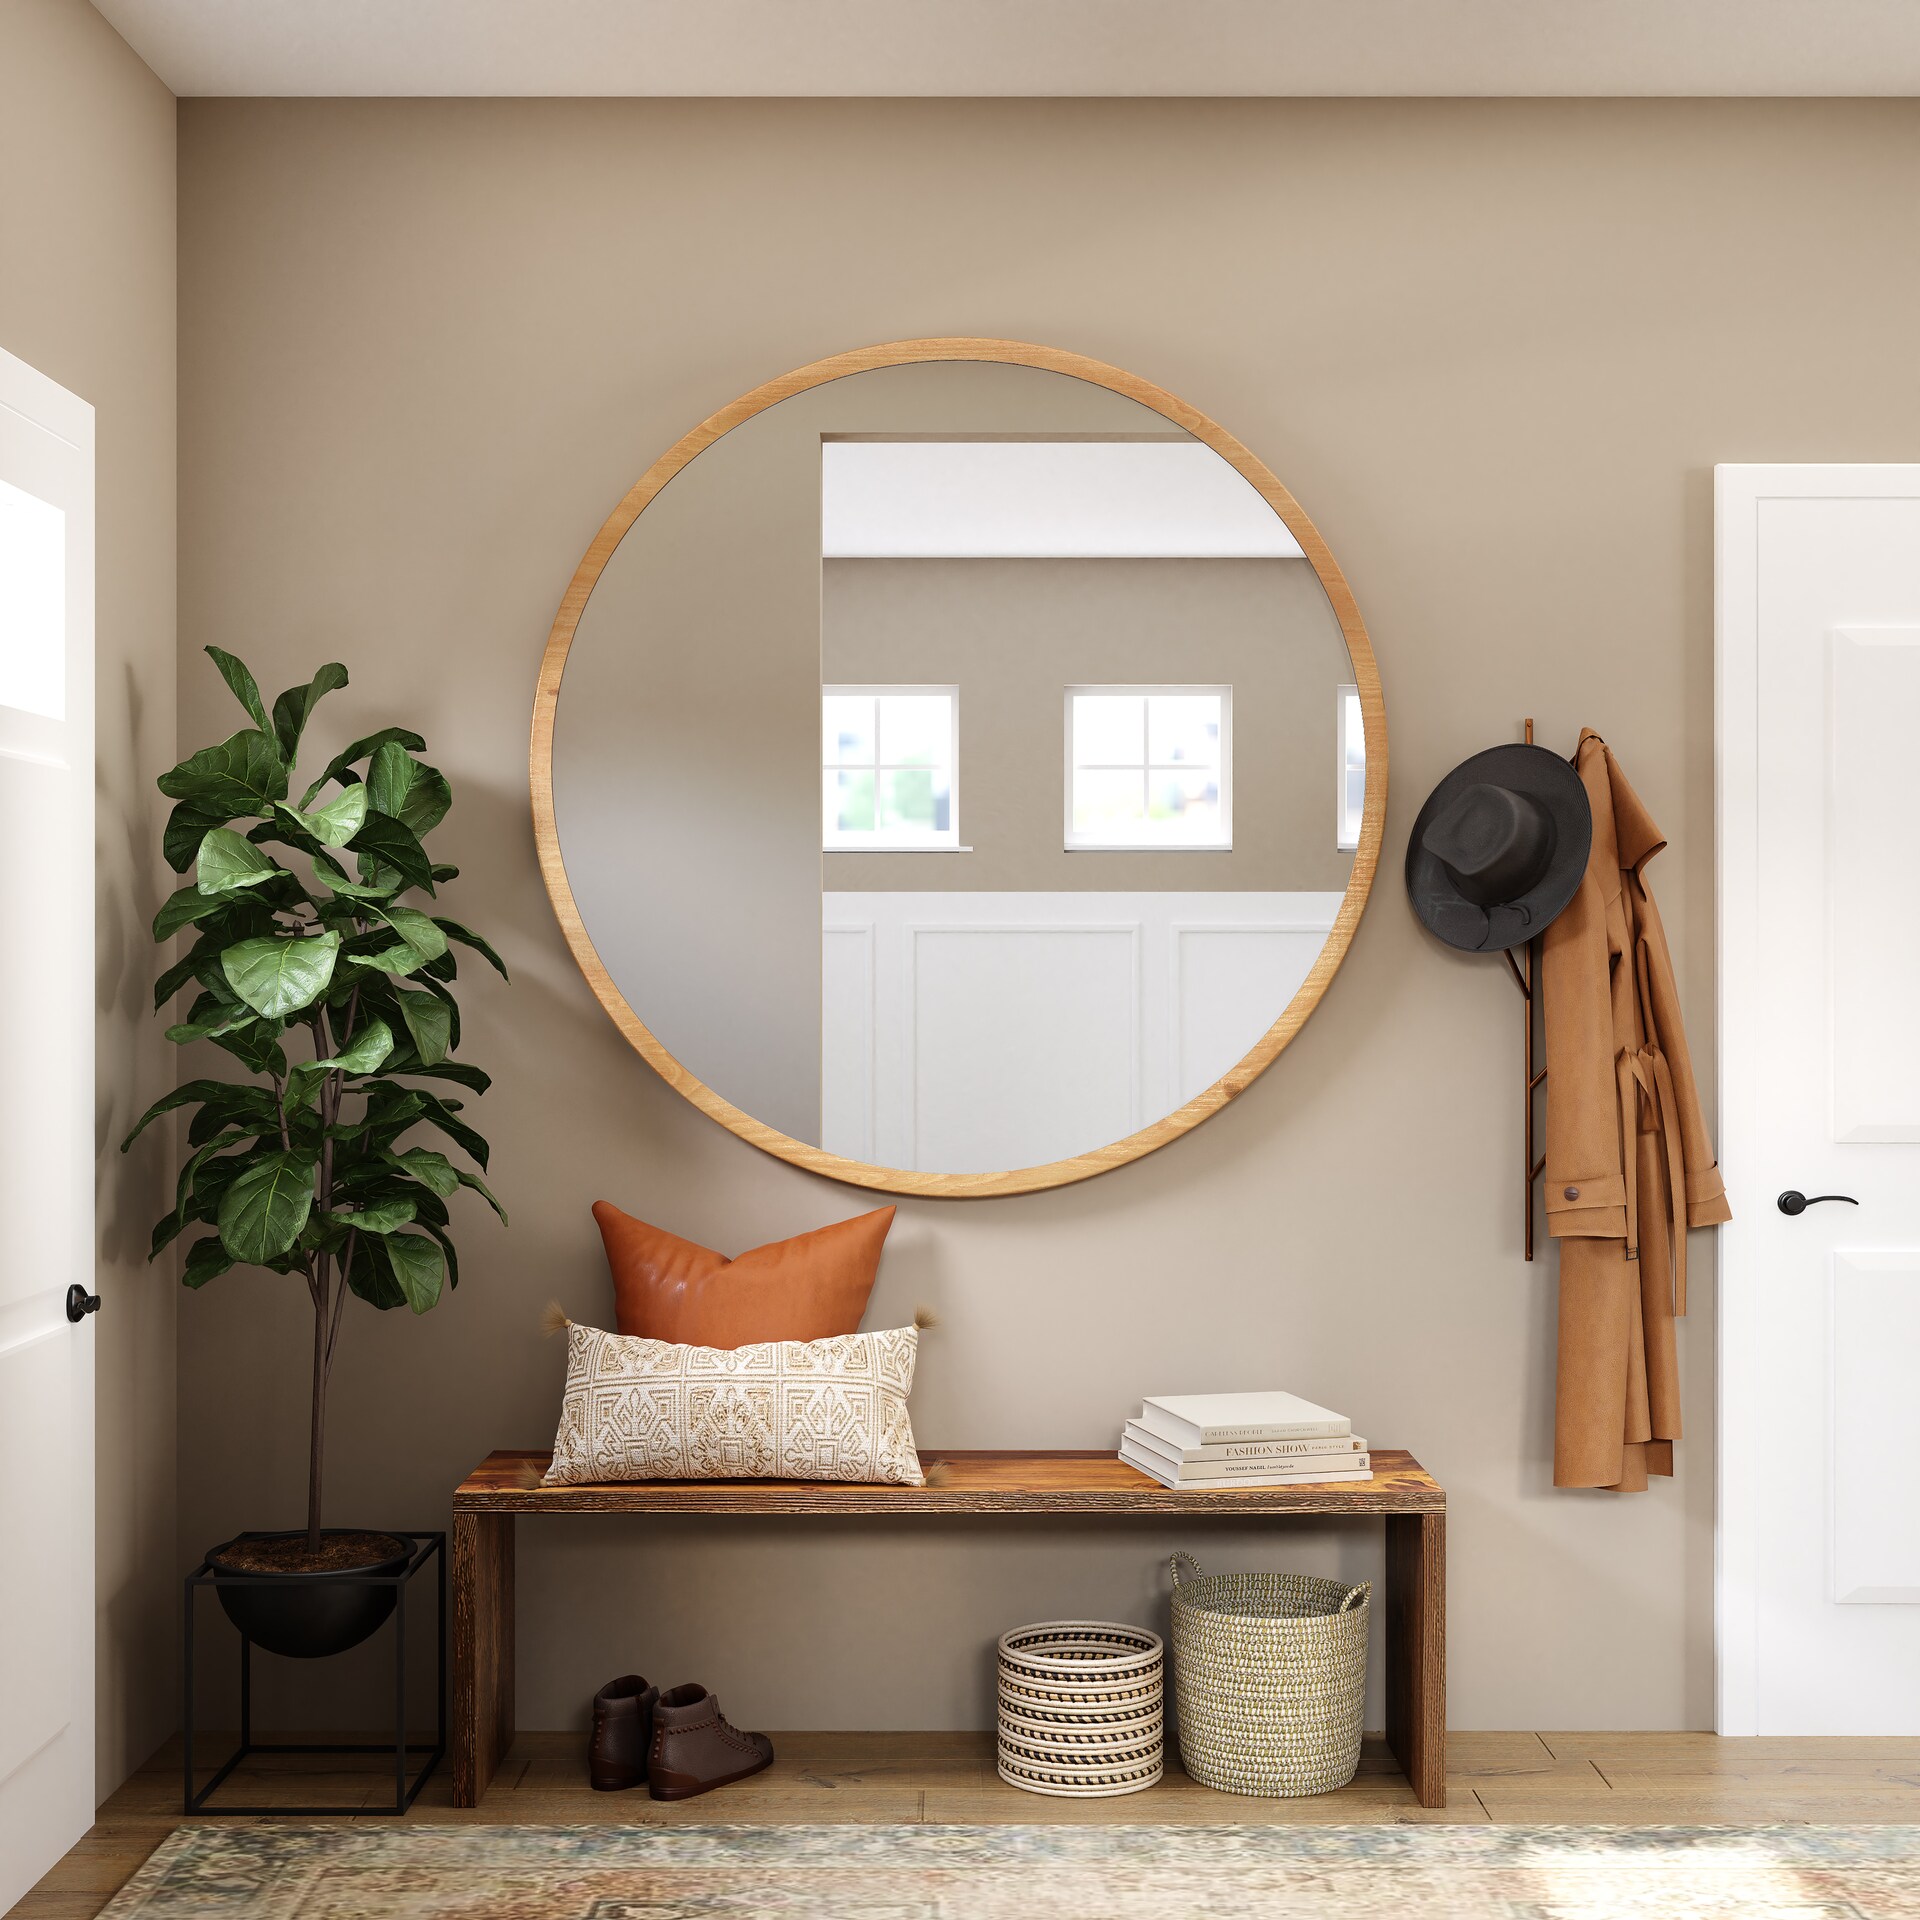 A large round mirror hanging in a hallway.